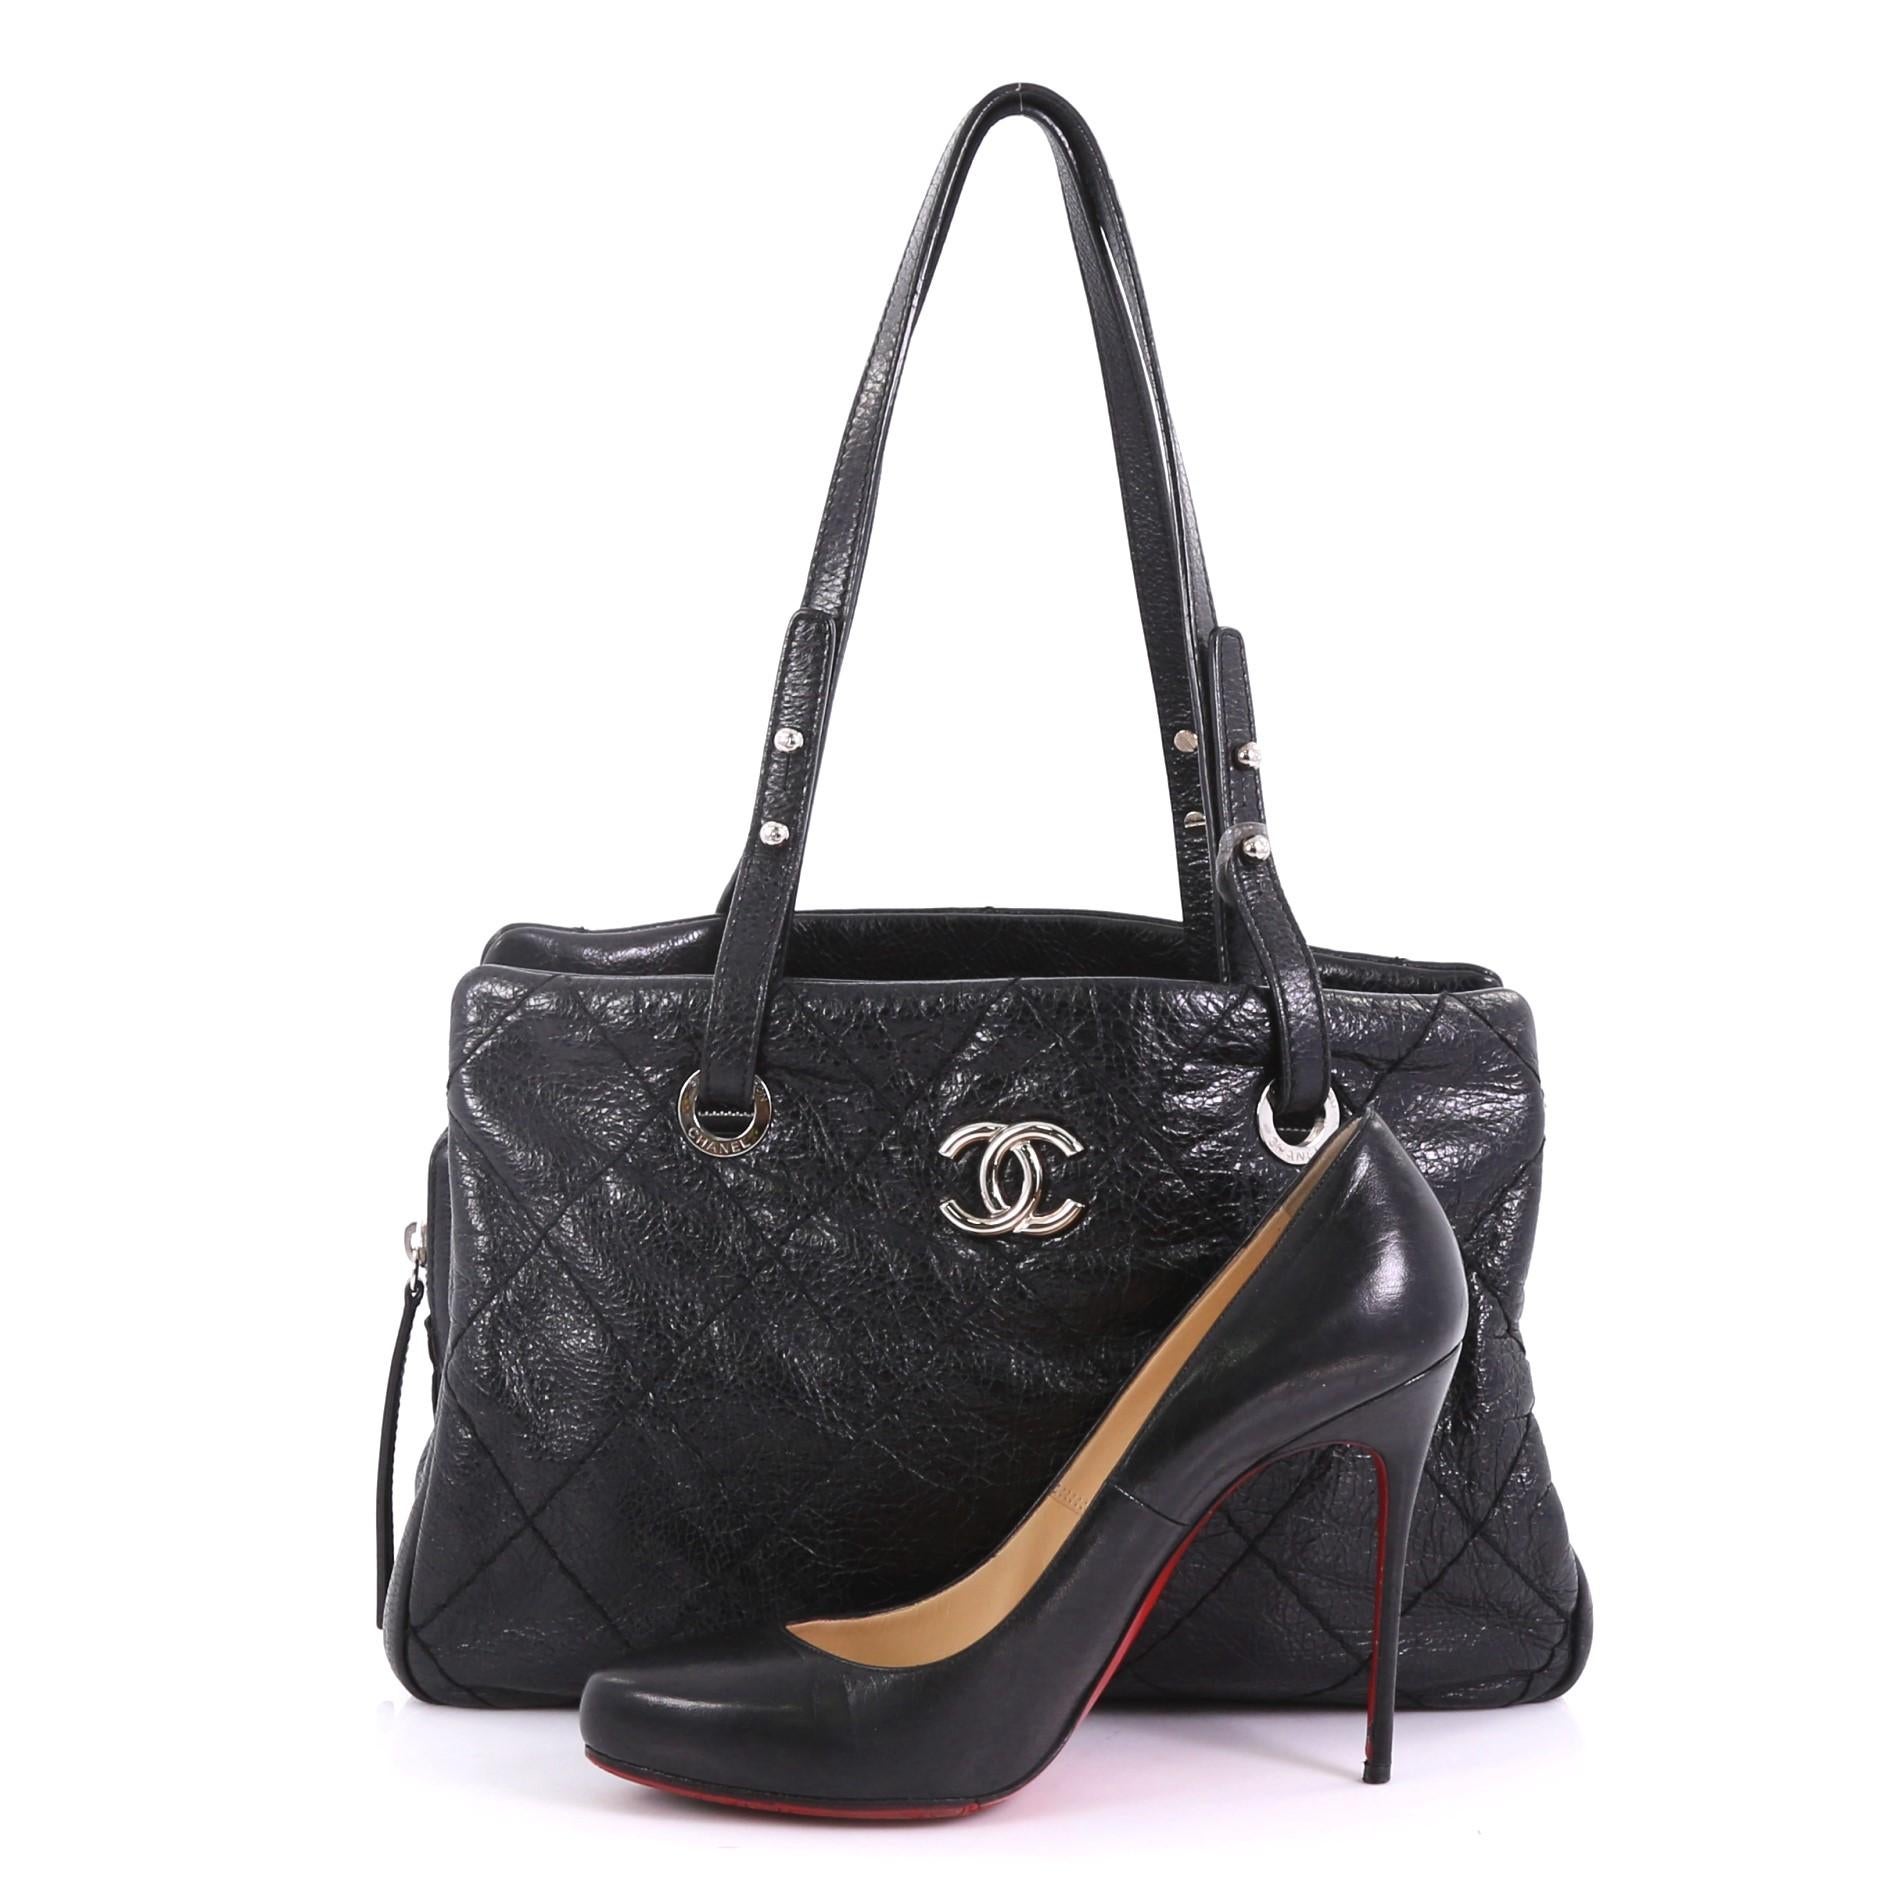 This Chanel On The Road Shopping Tote Quilted Leather Medium, crafted from black quilted leather, features dual flat leather handles, protective base studs, and silver-tone hardware. It opens to a black satin interior with a middle zip compartment